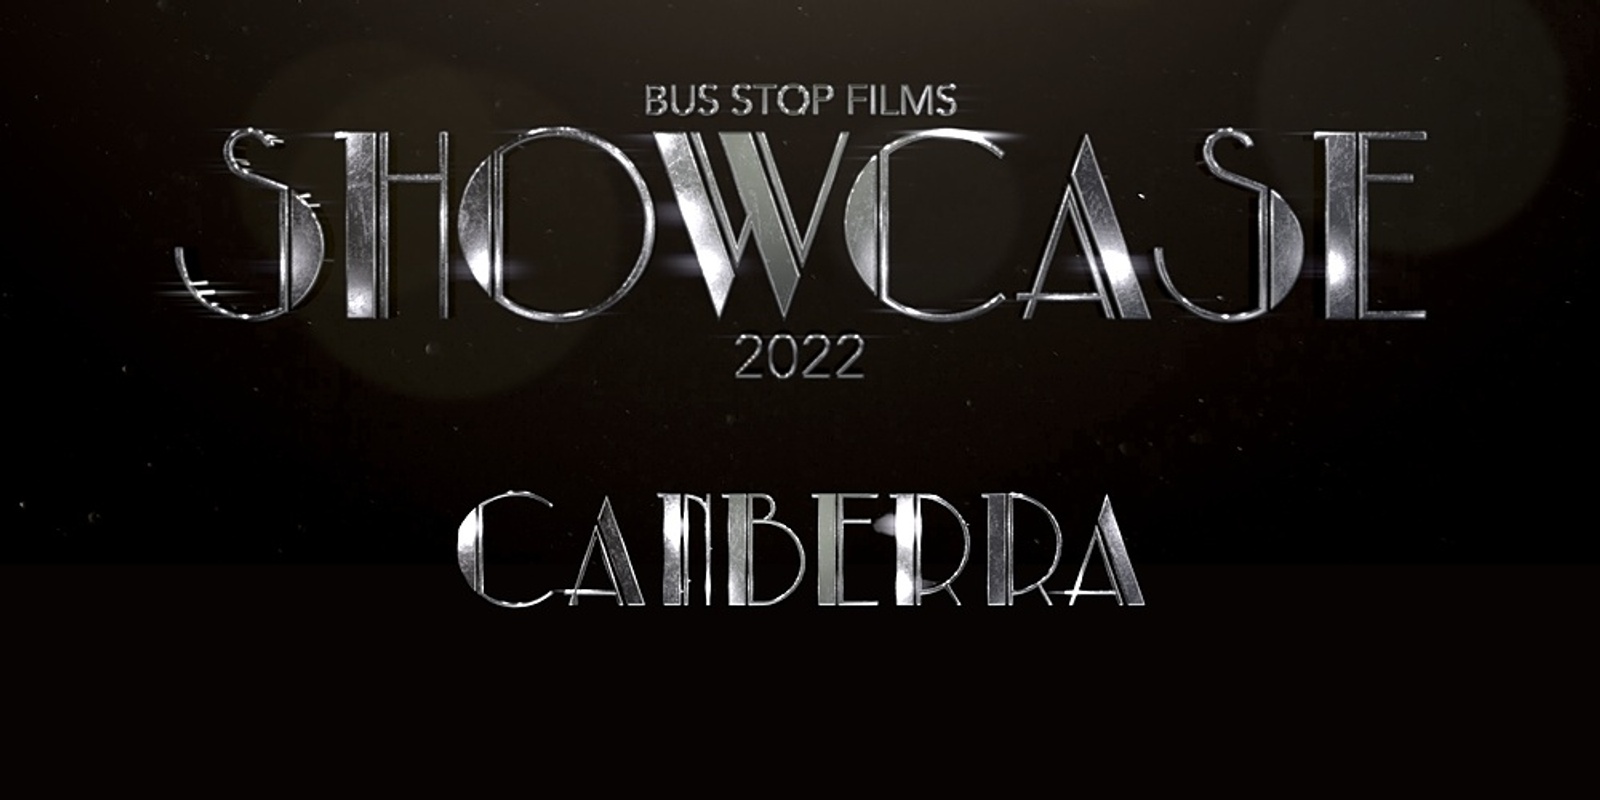 Banner image for Bus Stop Films Canberra Showcase 2022